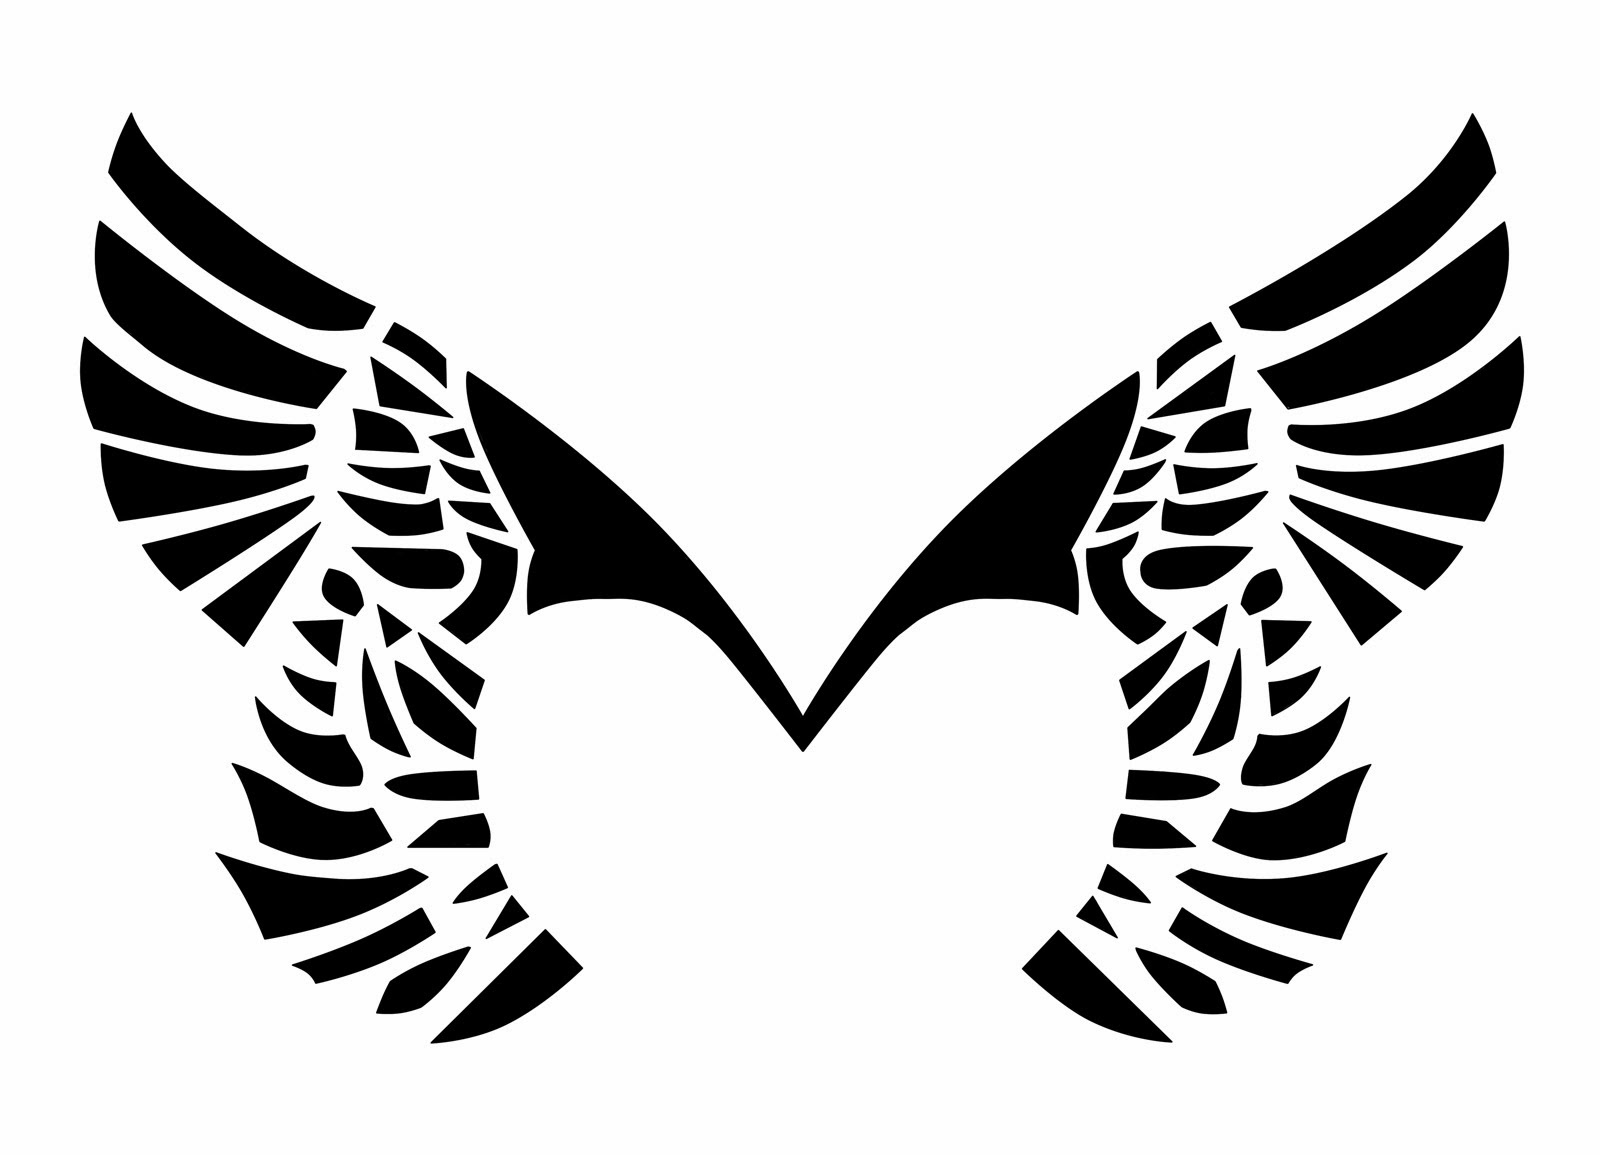 [Placebo_Wings_Tattoo_by_Trapped_In_Amber%255B5%255D.jpg]